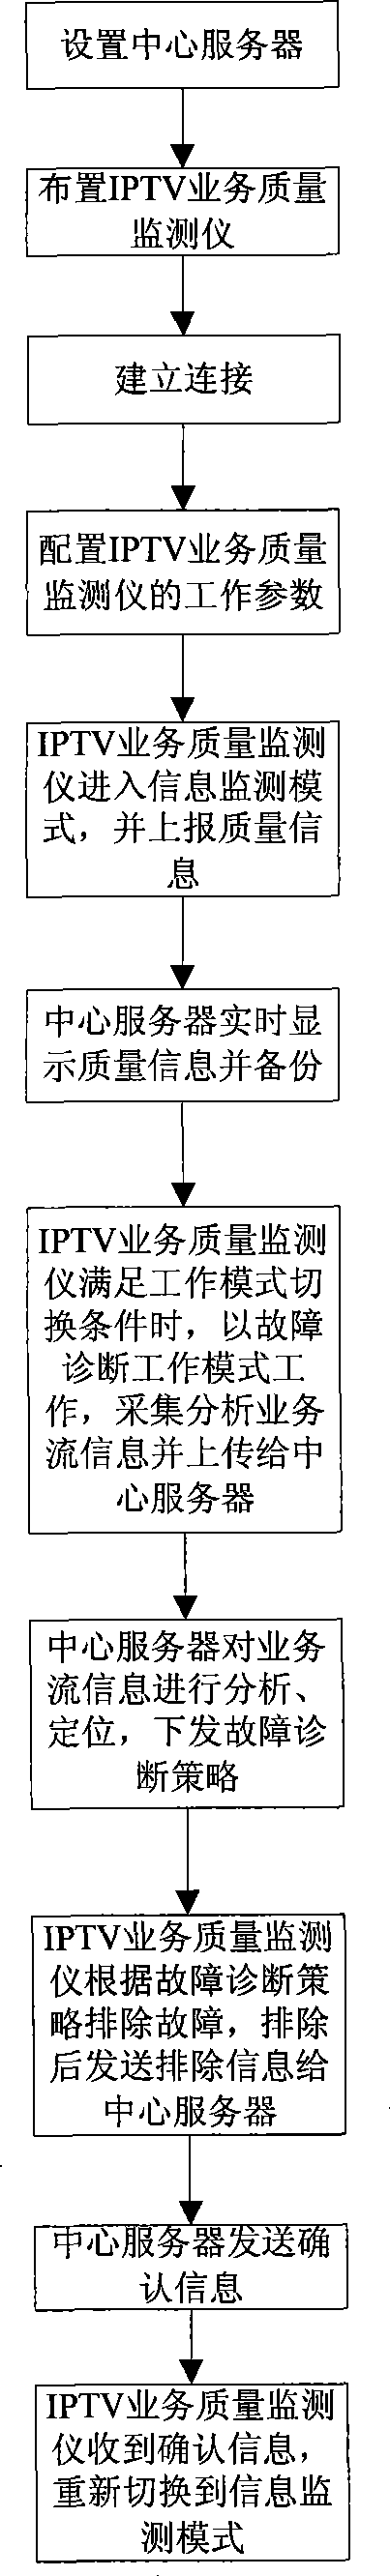 Monitoring method for distributed IPTV service transmission quality